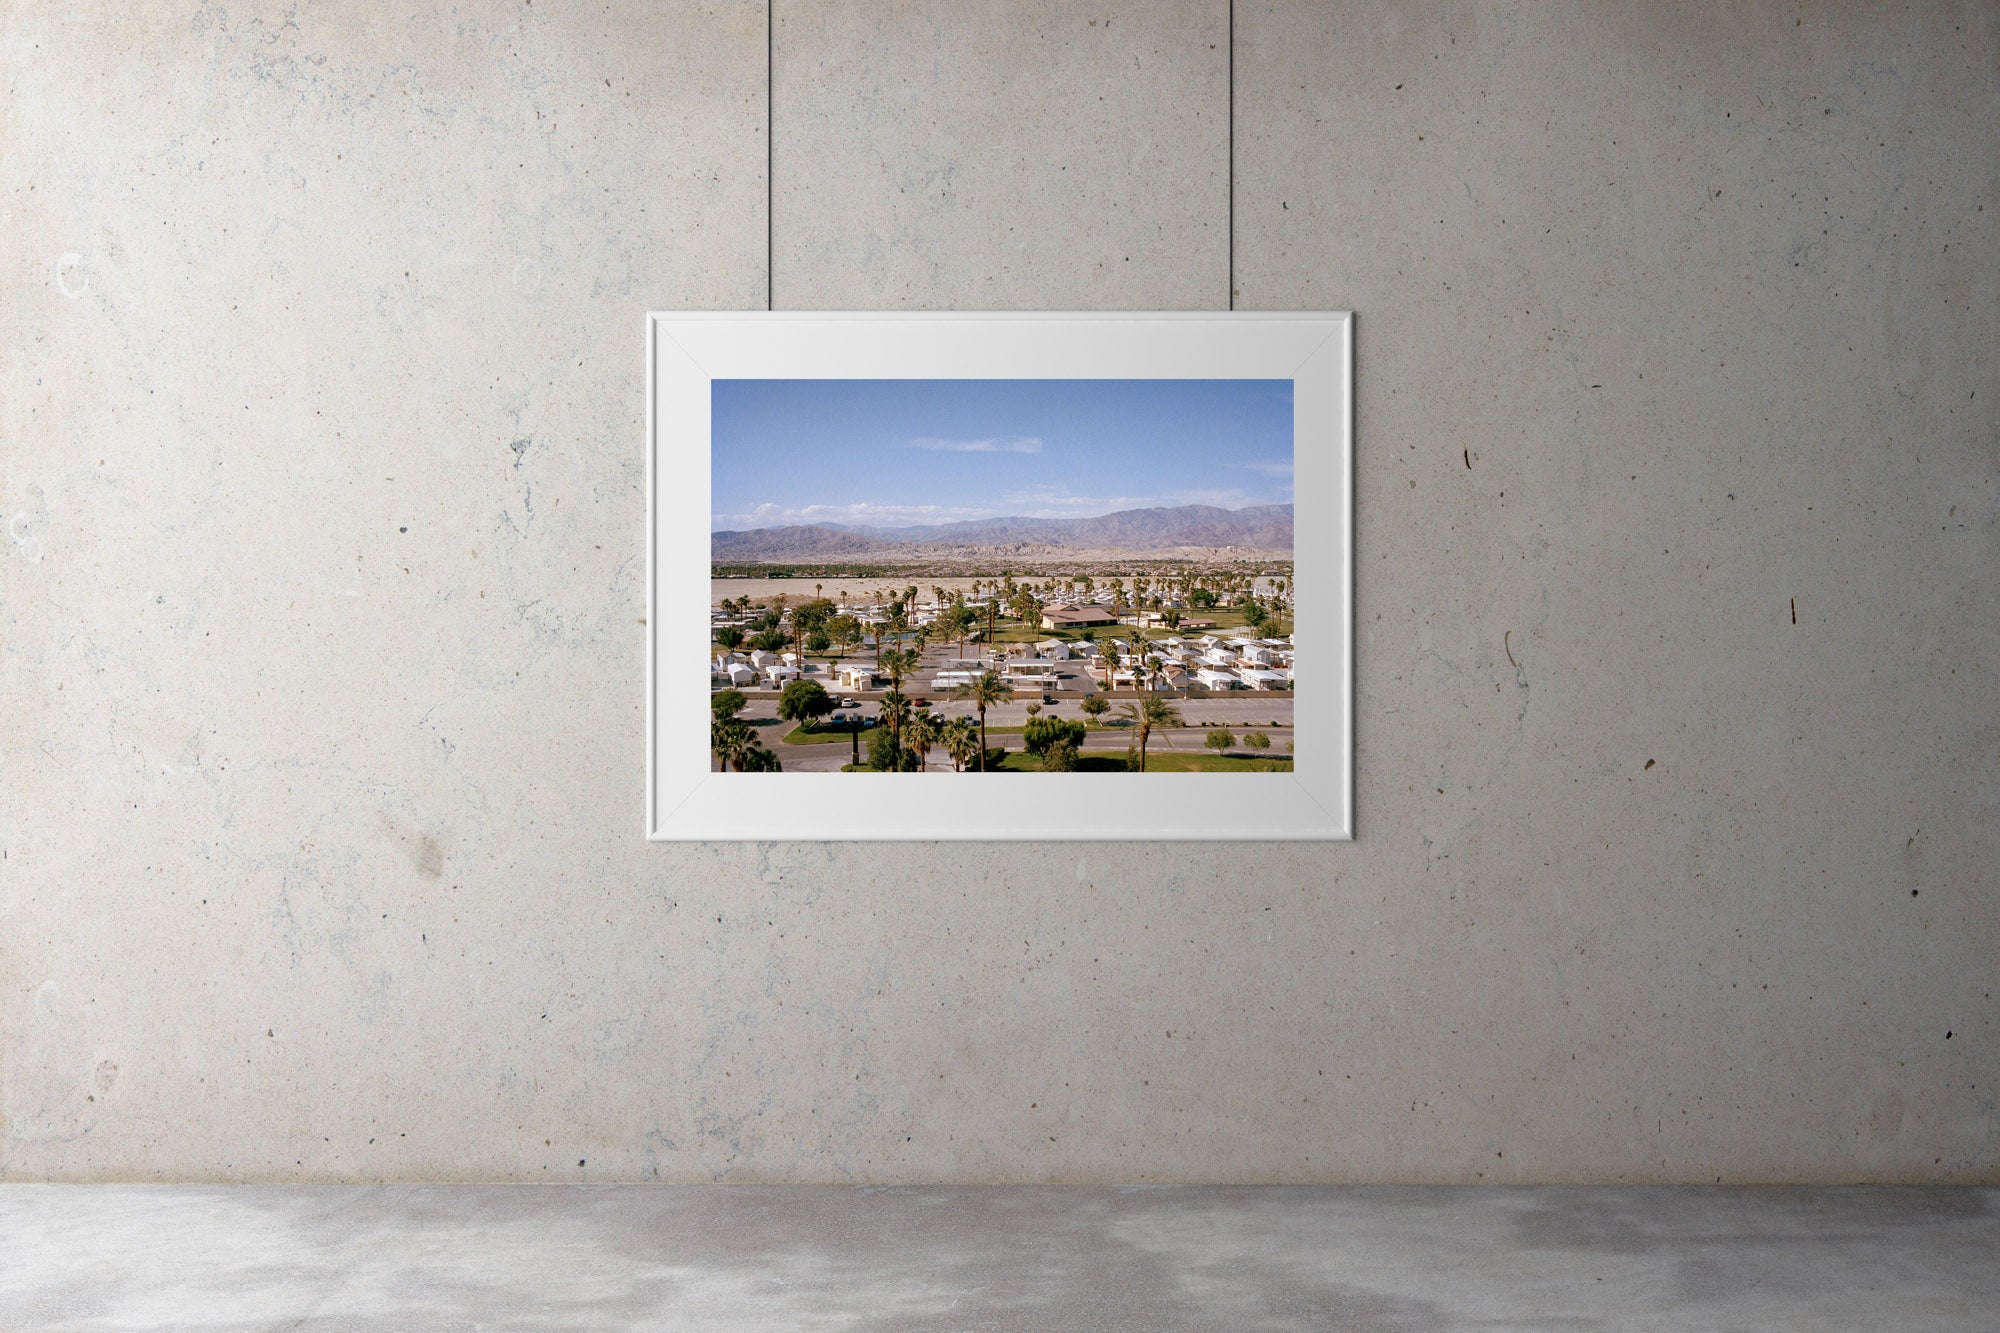 A photograph taken from a high vantage point of a large caravan park with mountains & desert in the background, Palm tree, Coachello, Indio, USA, Artwork, Prints, wall art, California, Photographic prints, Ocean Palm Springs, Framed artwork, Photography,  Film photography, Vintage photo style,  Interior design, beach, buy Art, photography art, buy art, ace hotel, Prints for sale, art prints, colour photography, surfing, surfboard, Malibu, Malibu,  surfing, sun, beach, sun baking, mid century